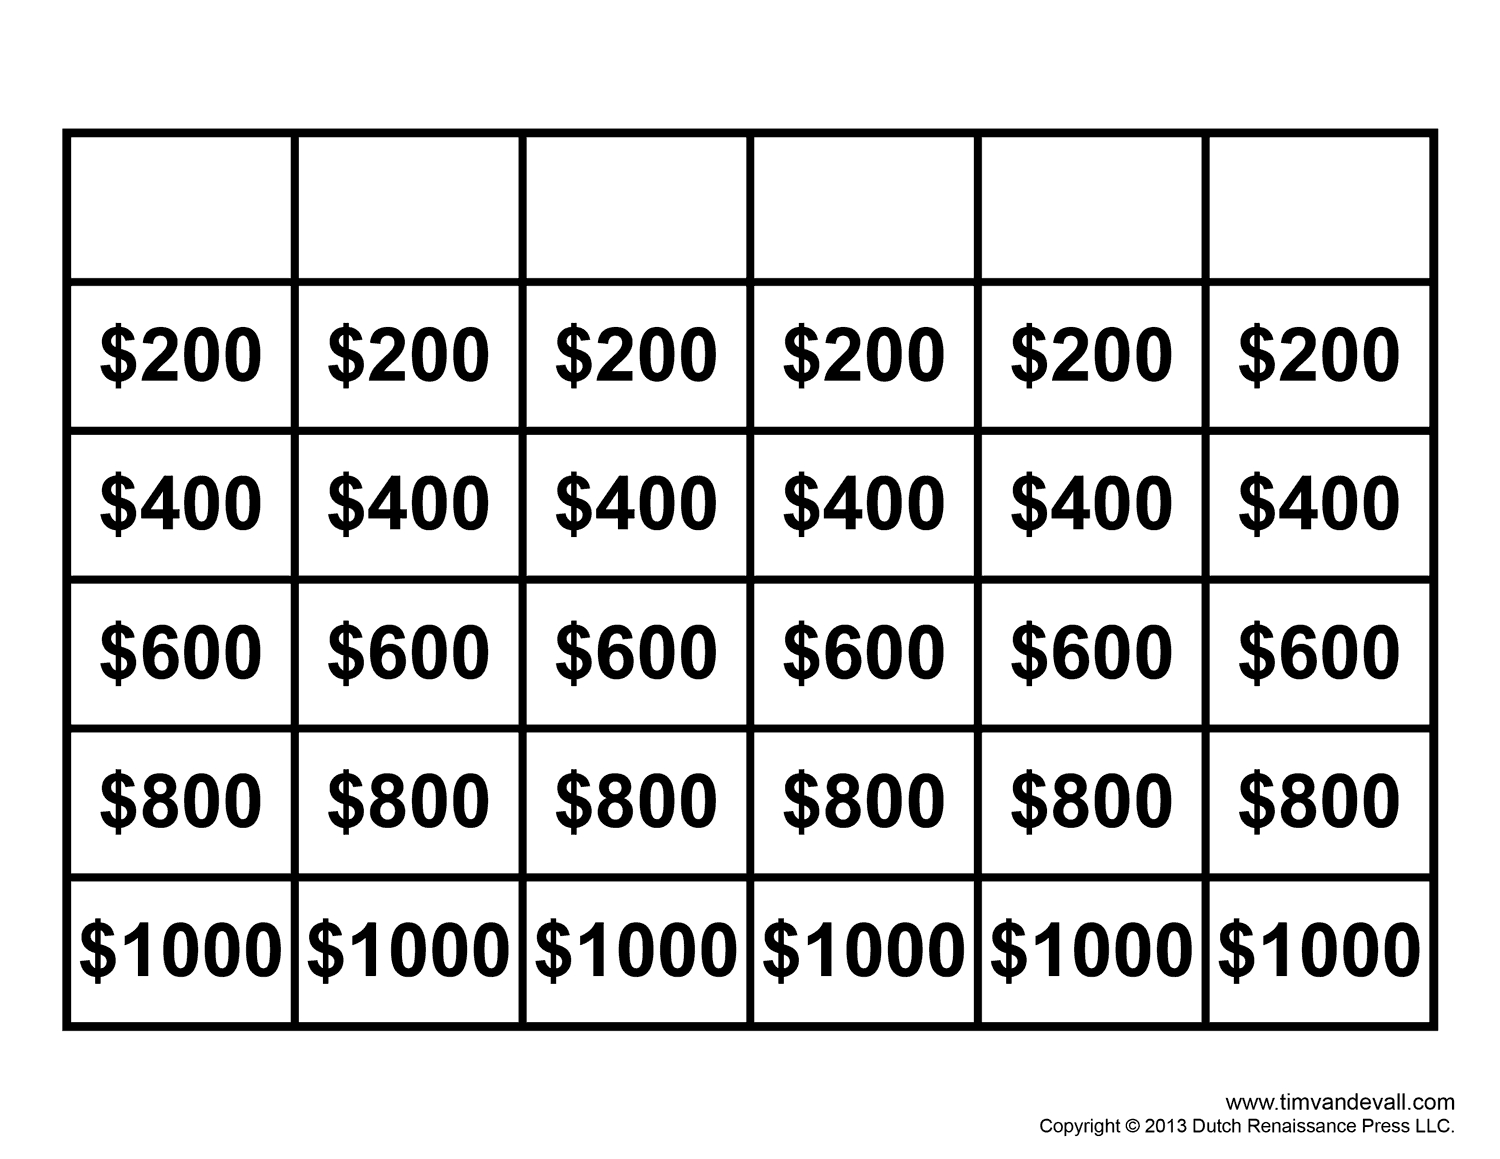 Free Jeopardy Template - Make Your Own Jeopardy Game - Free Printable Jeopardy Template